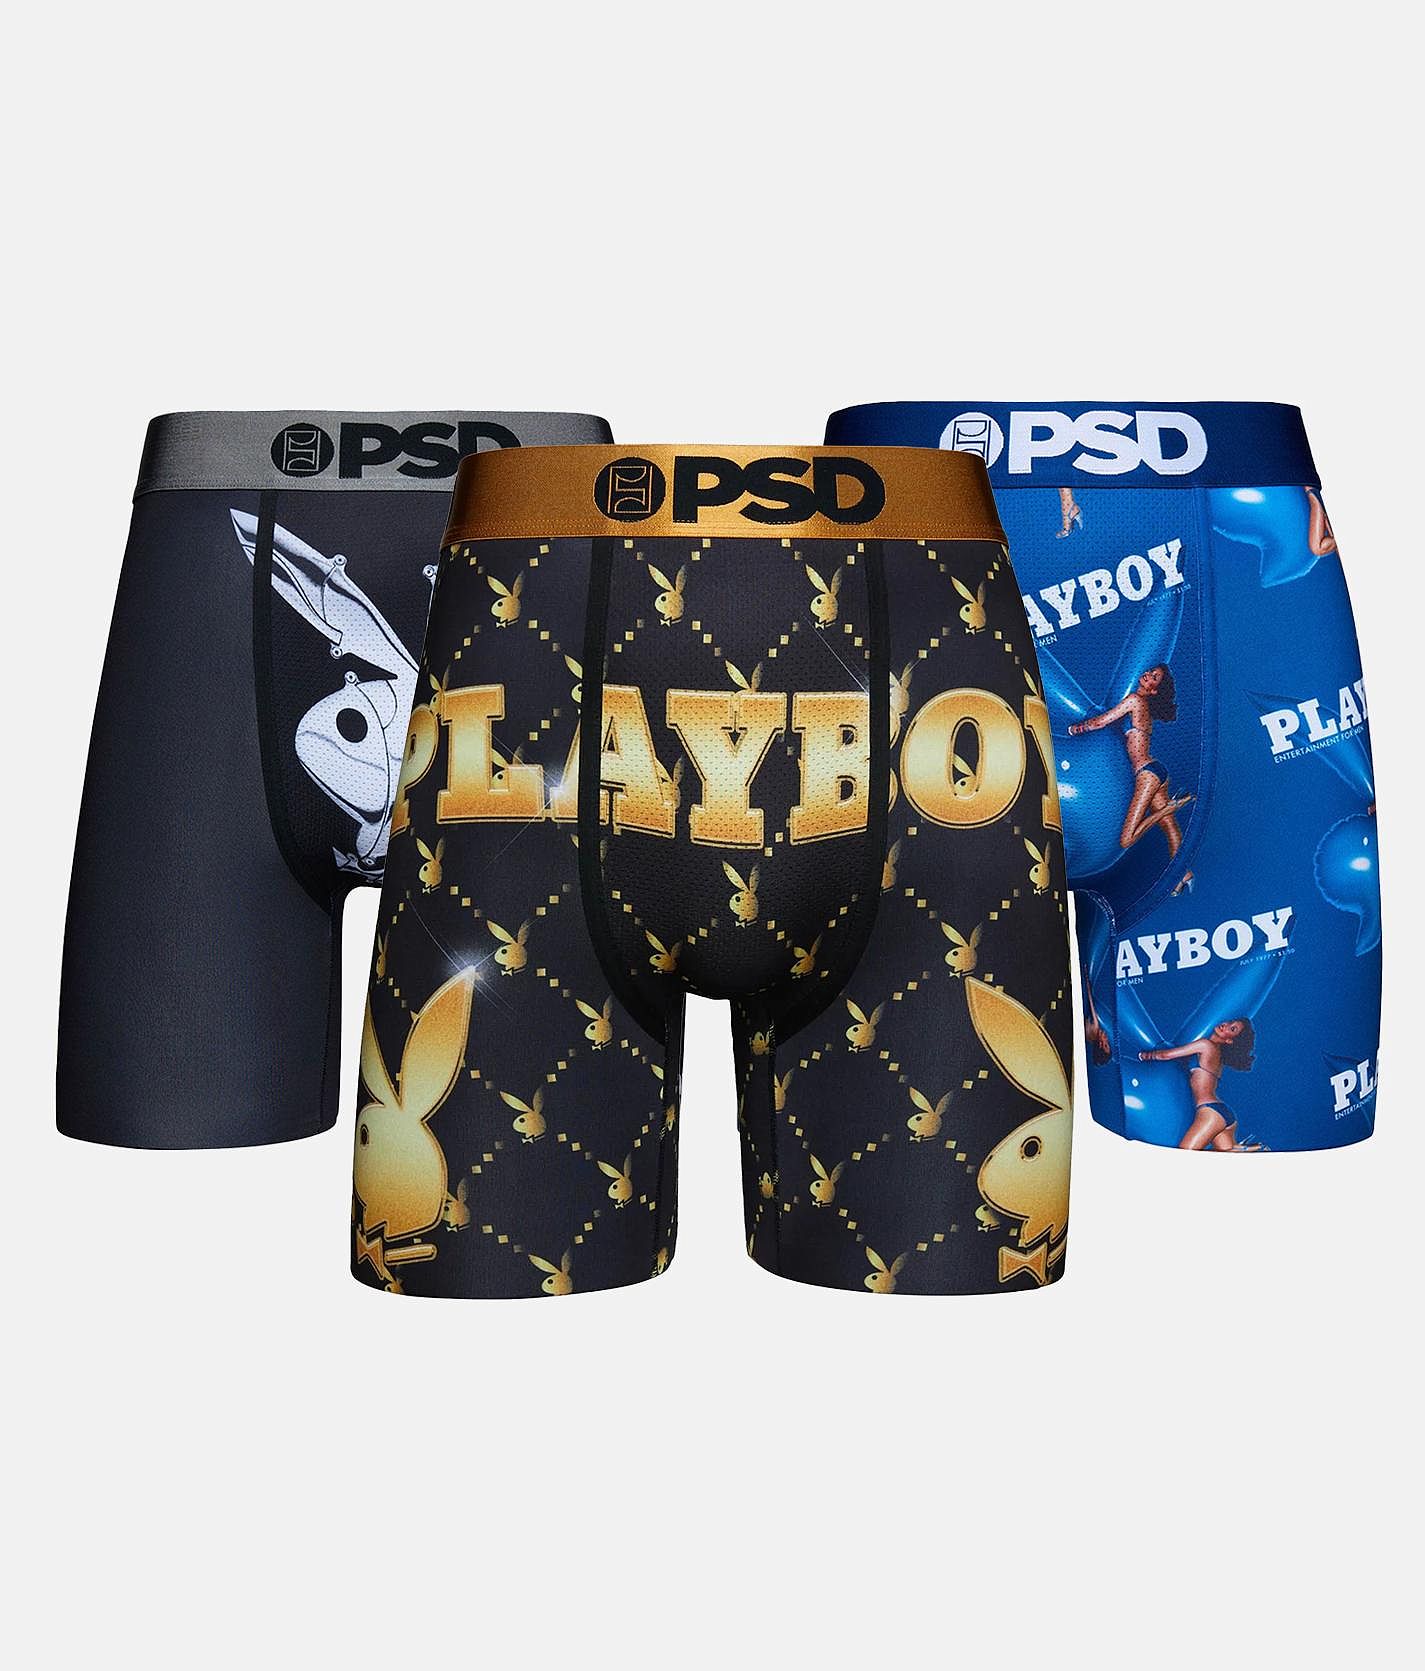 PSD 3 Pack Playboy Stretch Boxer Briefs - Men's Boxers in Multi